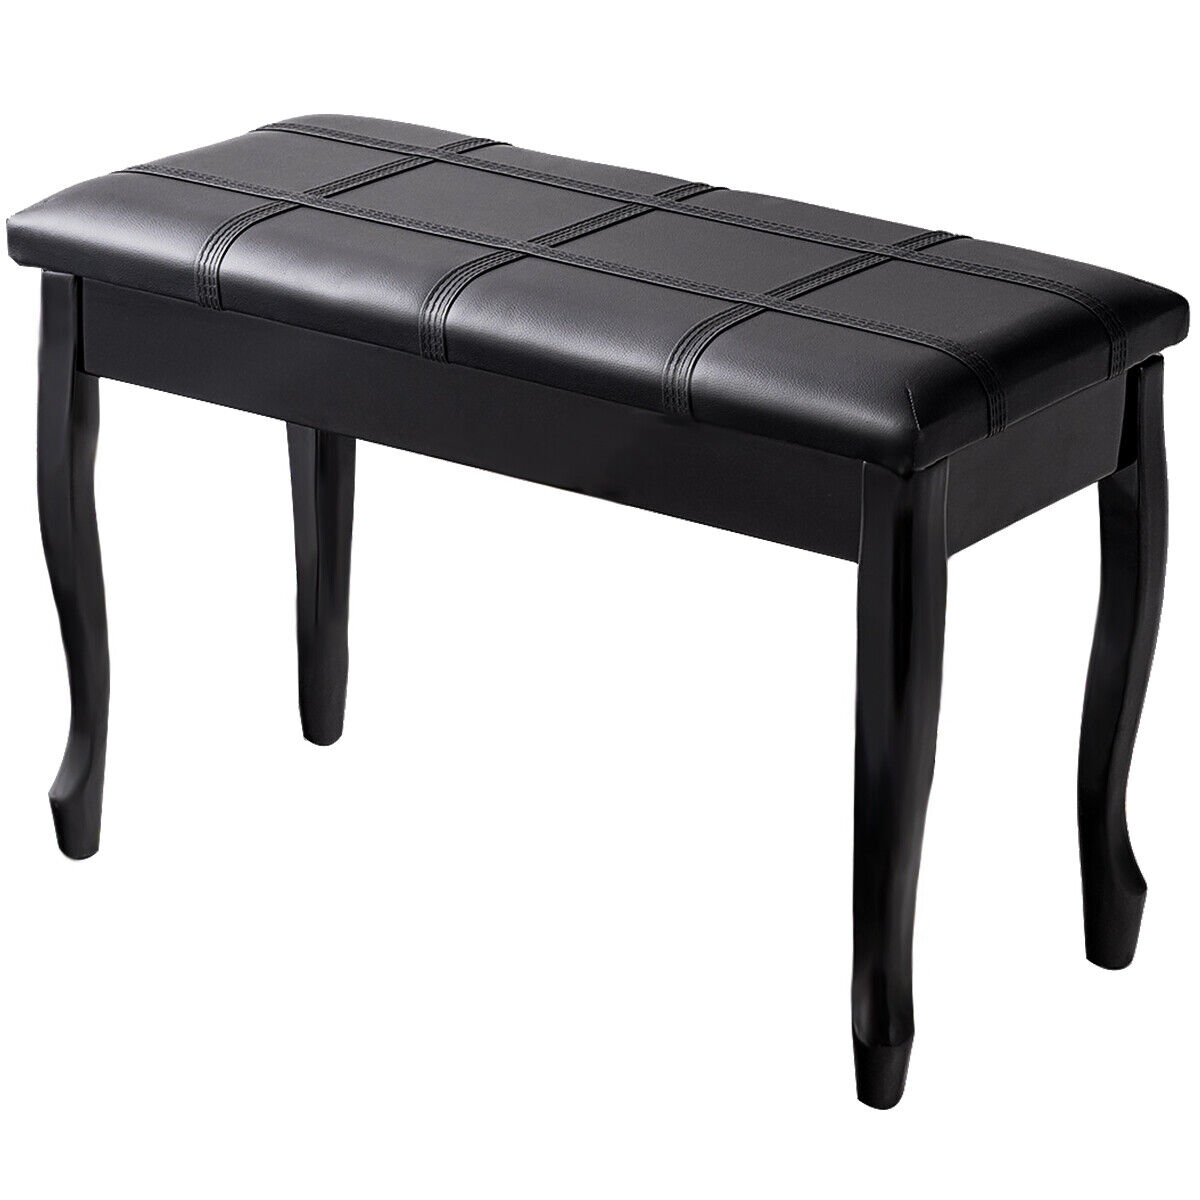 Leather Piano Bench with Storage Compartment and Wooden Legs-Black